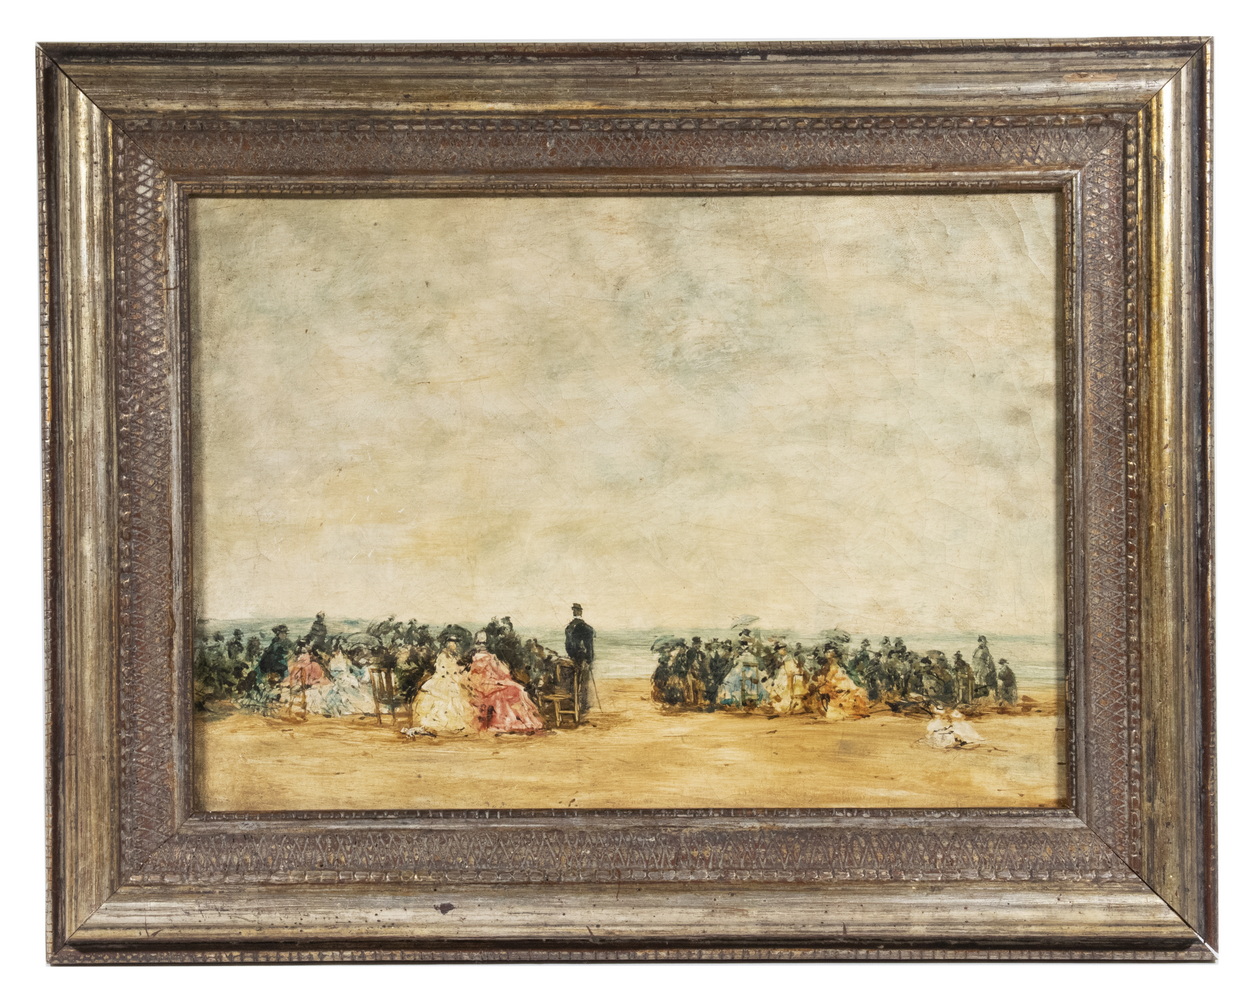 ATTRIBUTED TO EUGENE LOUIS BOUDIN